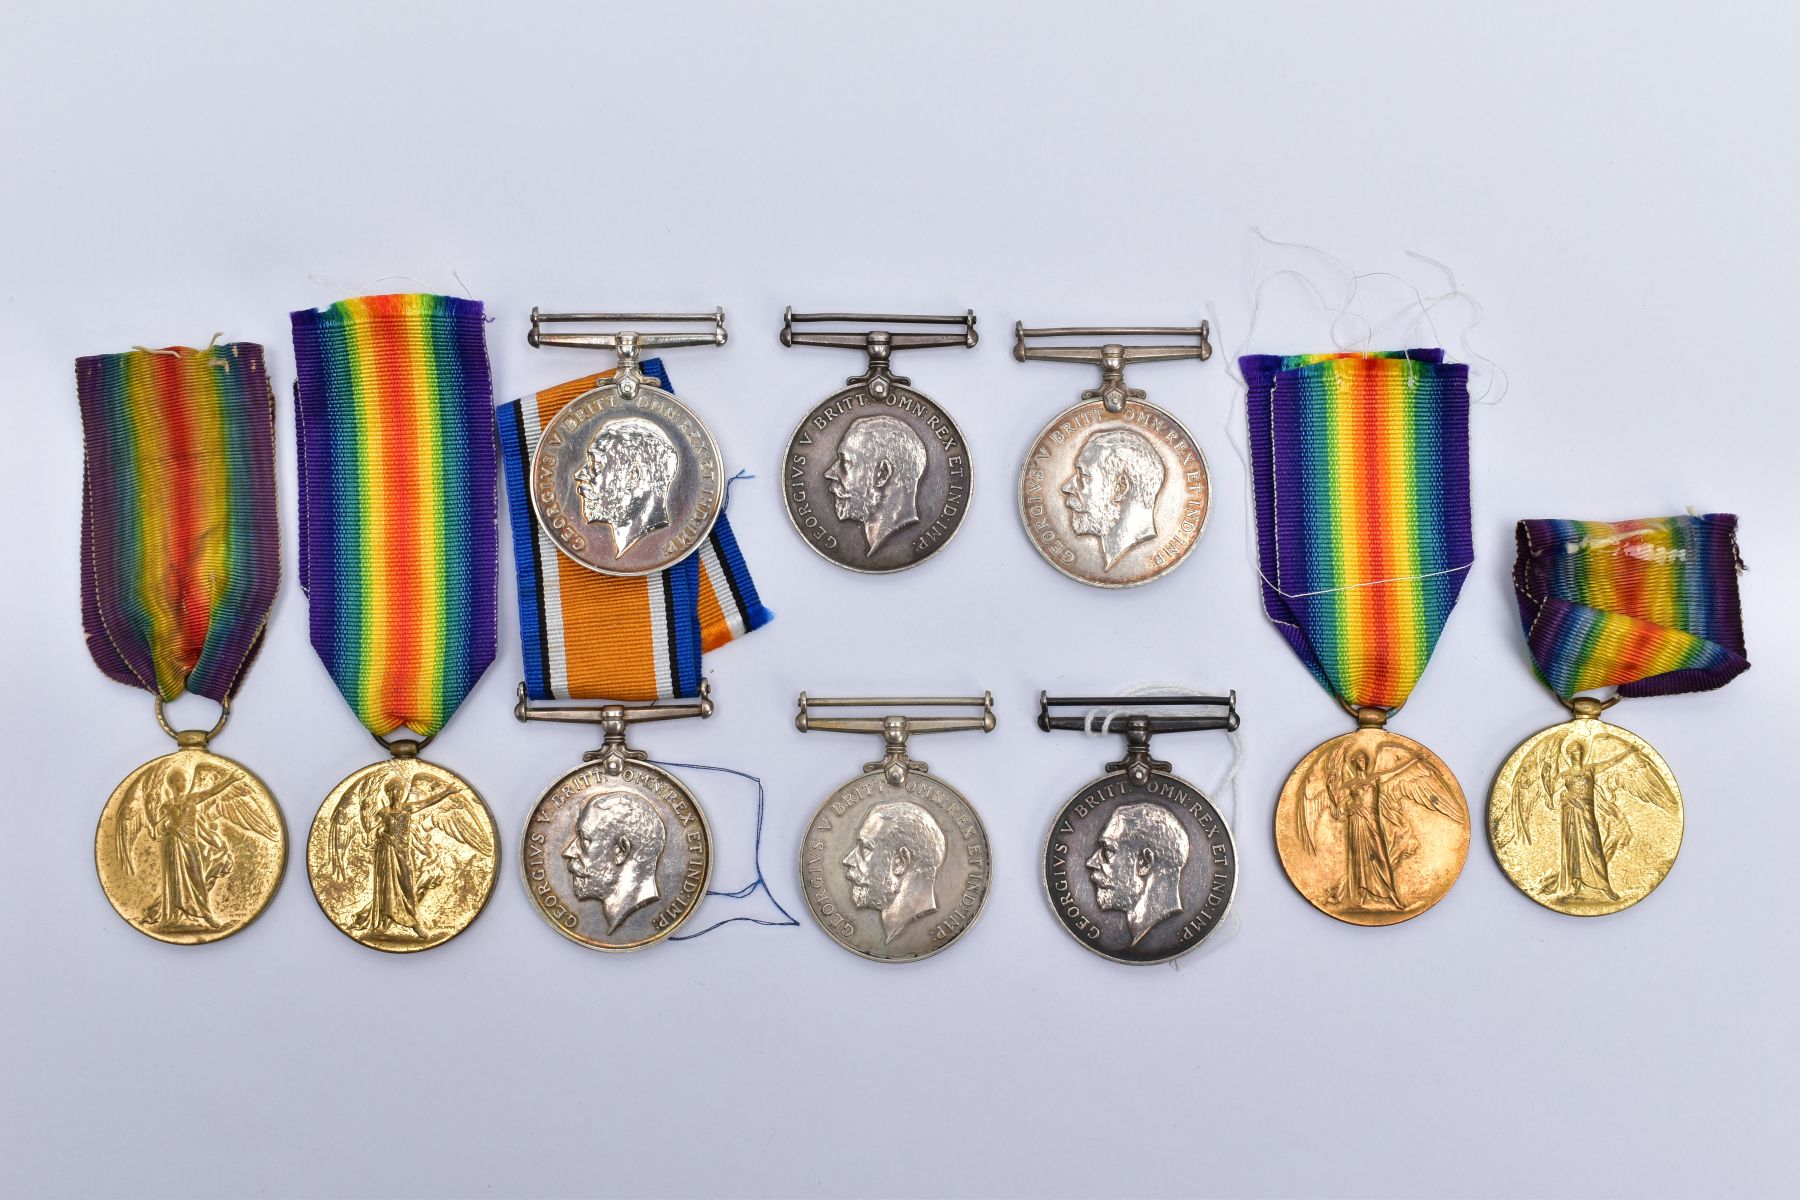 A SMALL COLLECTION OF BRITISH WWI MEDALS, comprising of a British War & Victory medals named J.52444